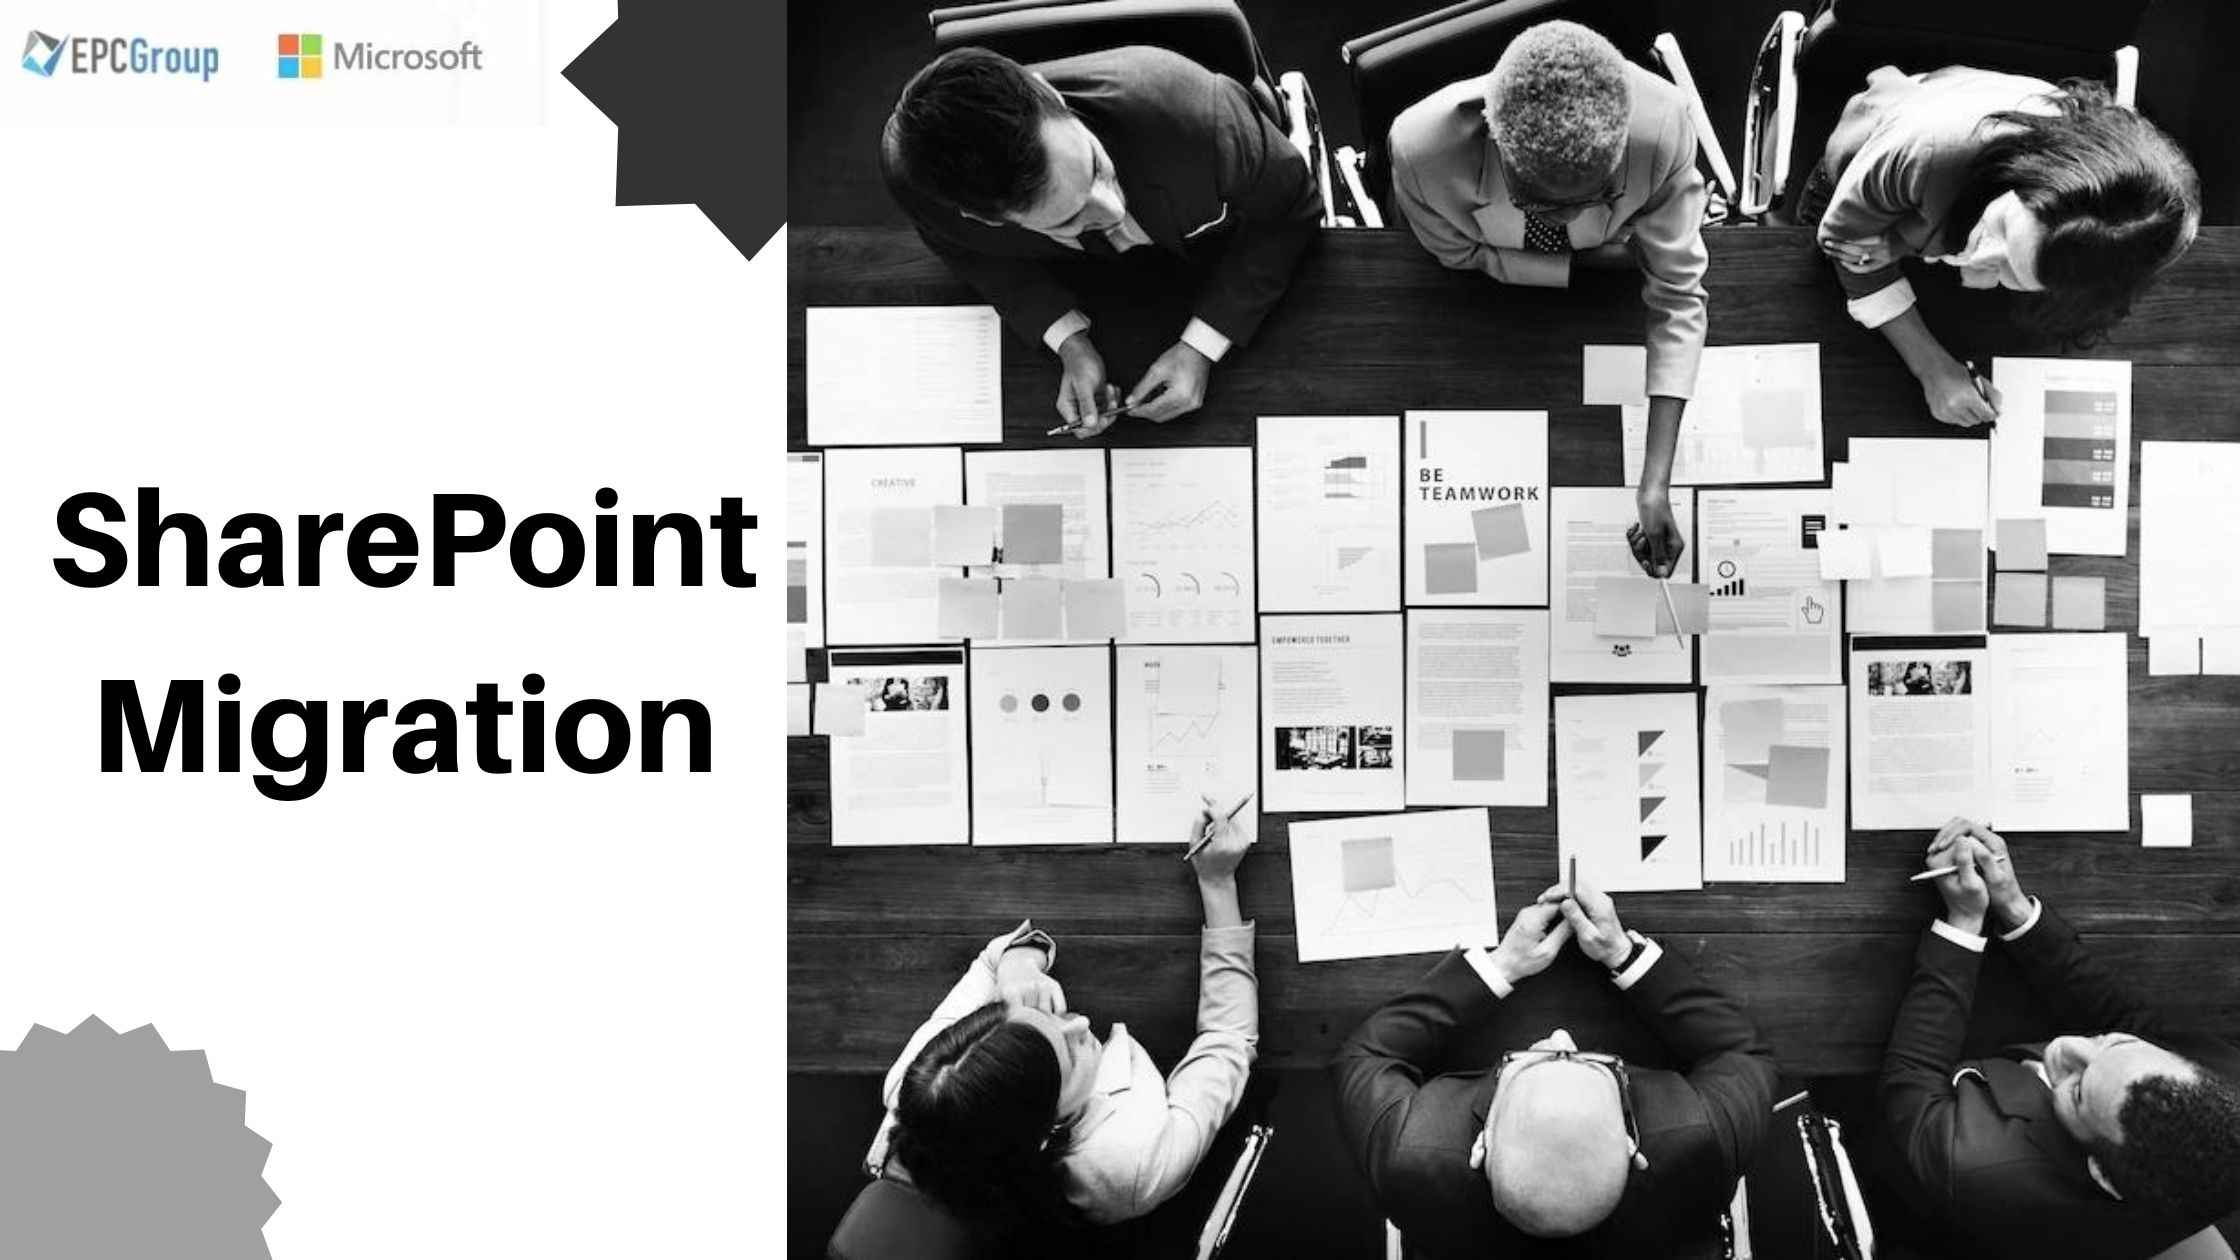 SharePoint Migration Environment: What you need to know